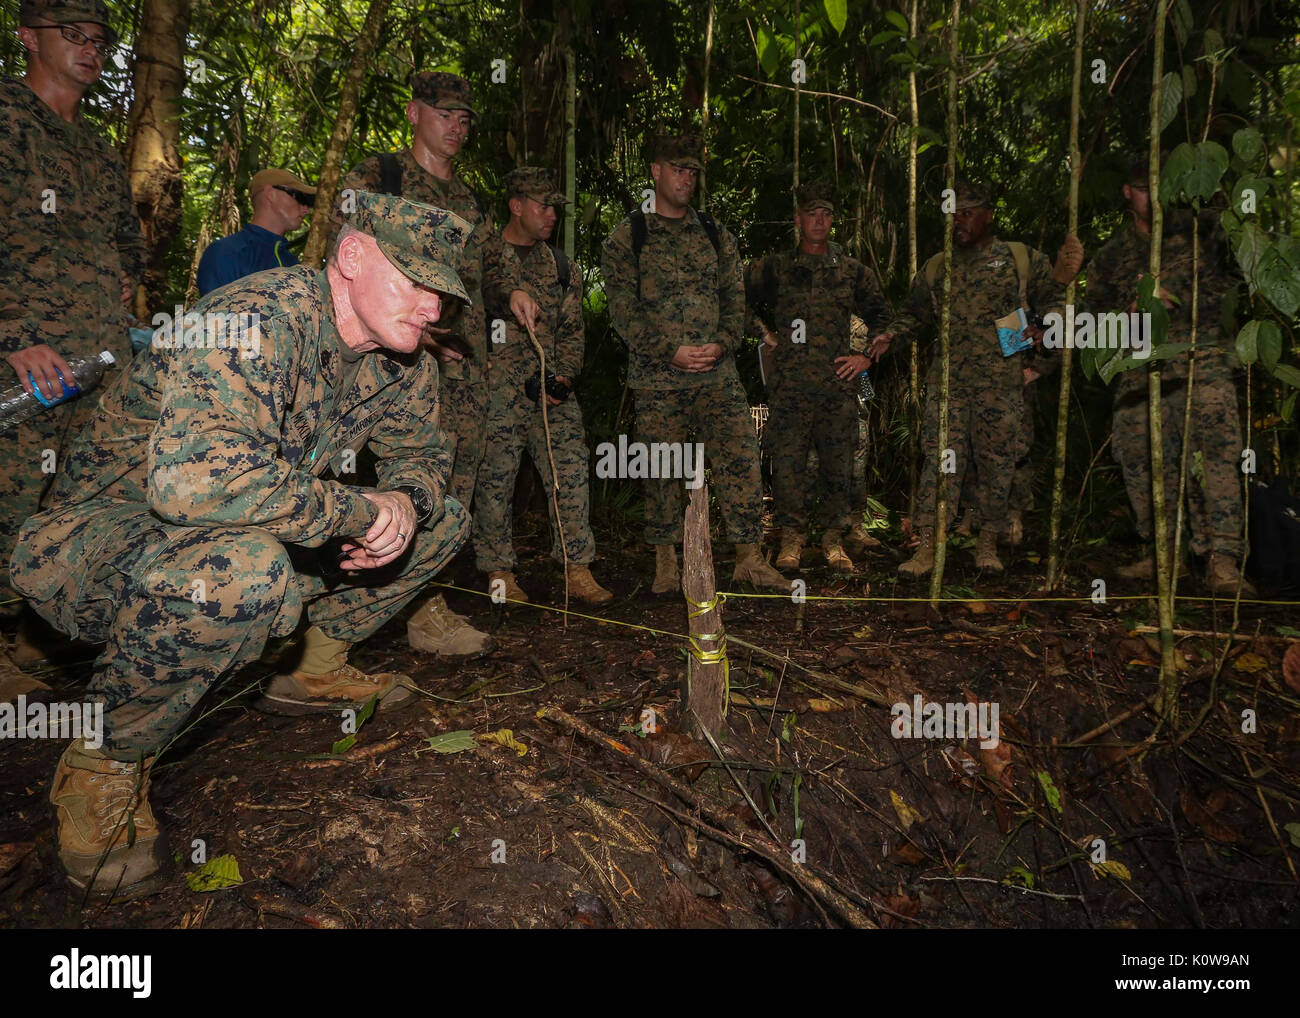 U.S. Marine Corps Sgt. Maj. Paul McKenna, force sergeant major of U.S. Marine Corps Forces, Pacific, crouches for a closer look Aug. 8, 2017, at the fighting position Gunnery Sgt. John Basilone held on Bloody Ridge, Guadalcanal, Solomon Islands. Basilone received the Medal of Honor for his actions during the Oct. 24 & 25, 1942 battle there.  Marines with 1st Marine Division and MARFORPAC learned about the small unit leadership exhibited during the Battle of Guadalcanal Aug. 7, 1942 to Feb. 9, 1943. (U.S. Marine Corps photo by Sgt. Wesley Timm) Stock Photo